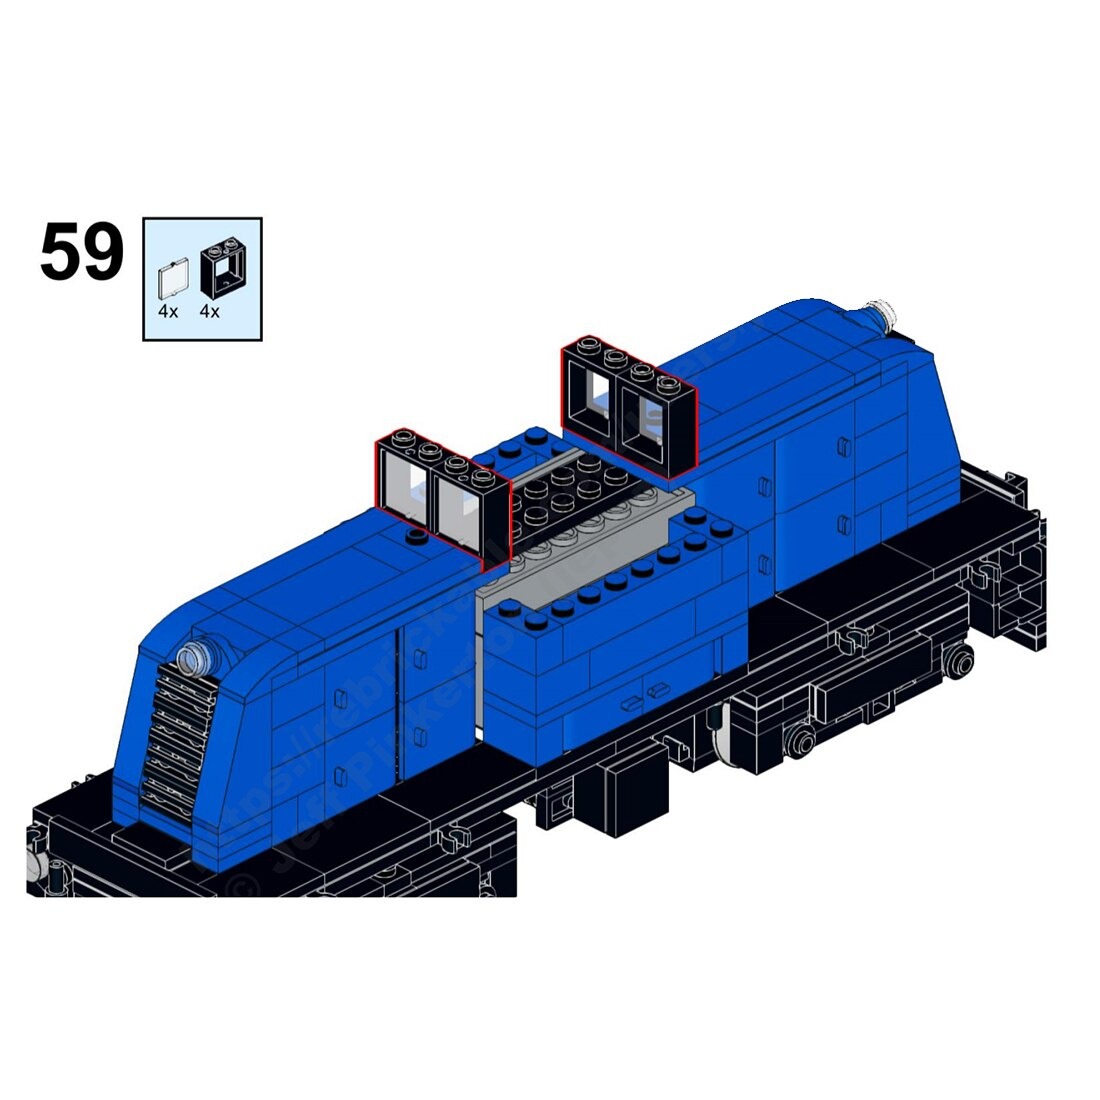 Ferdinand RR GE 45 Tom Switcher MOC-116974 Technic With 582 Pieces